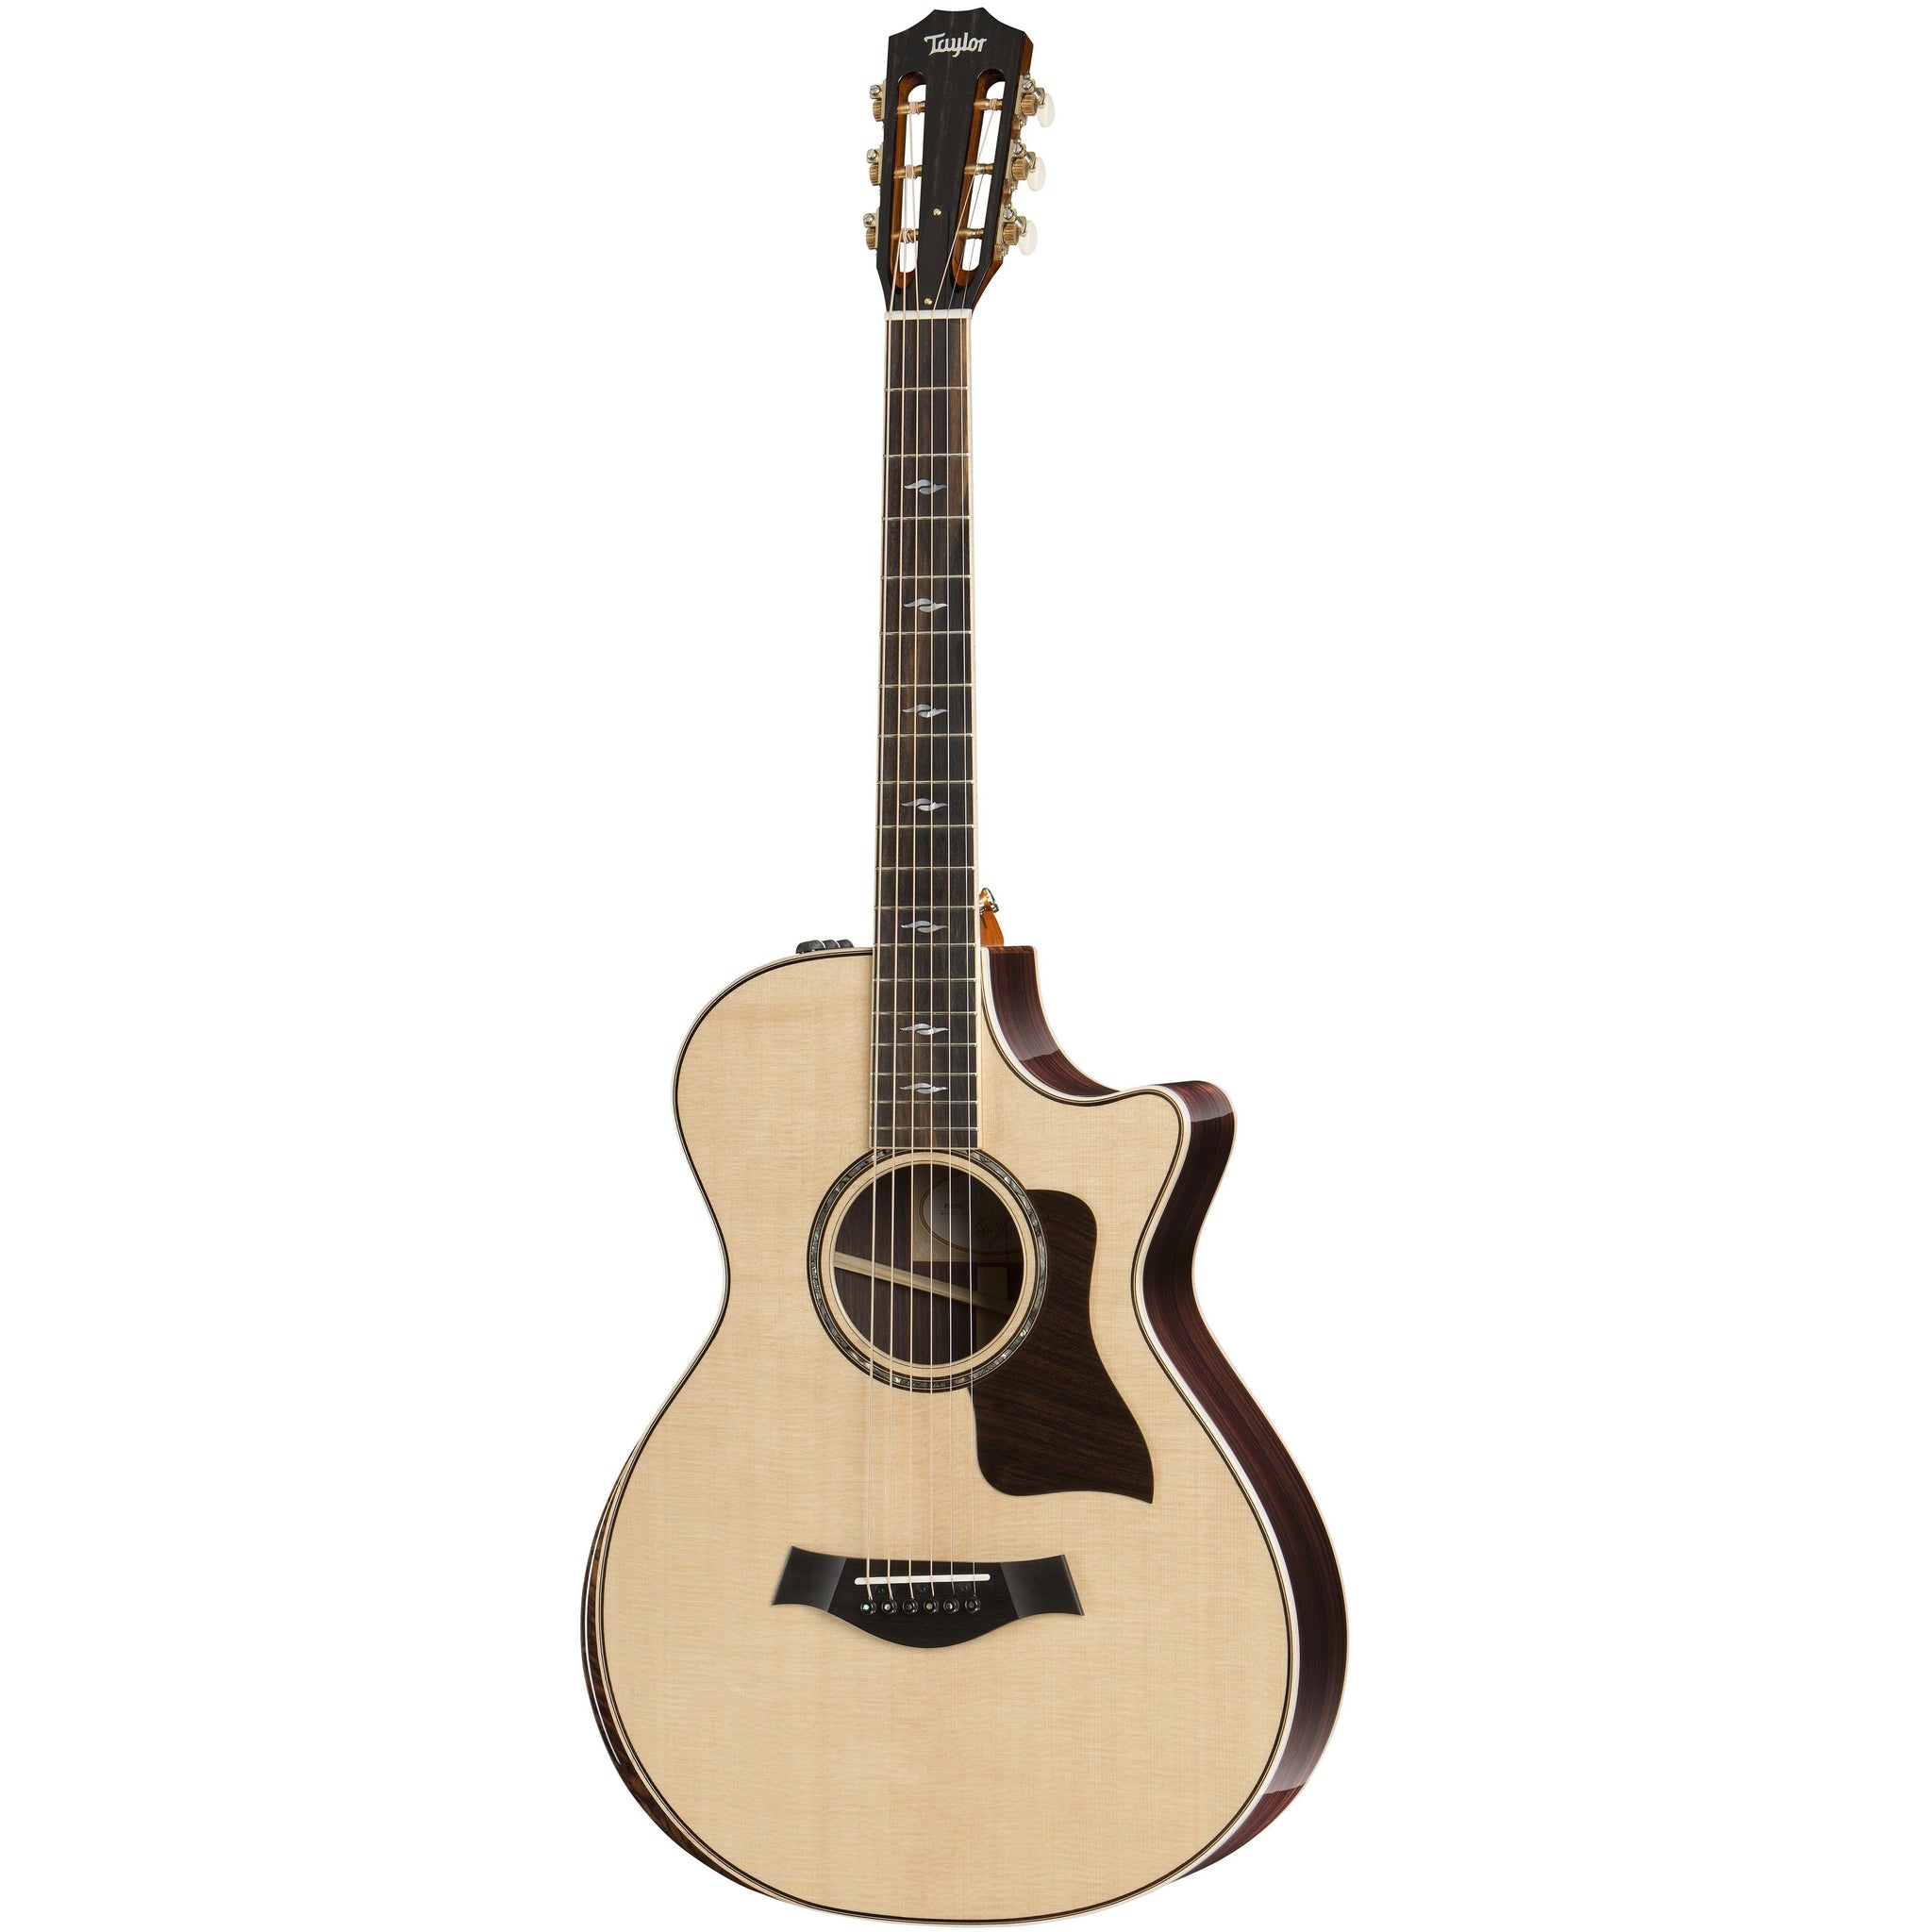 Taylor 812CE 2017 12-Fret Deluxe Grand Concert Acoustic/Electric Guitar with ES2 Pickup & Hardshell Case-Music World Academy